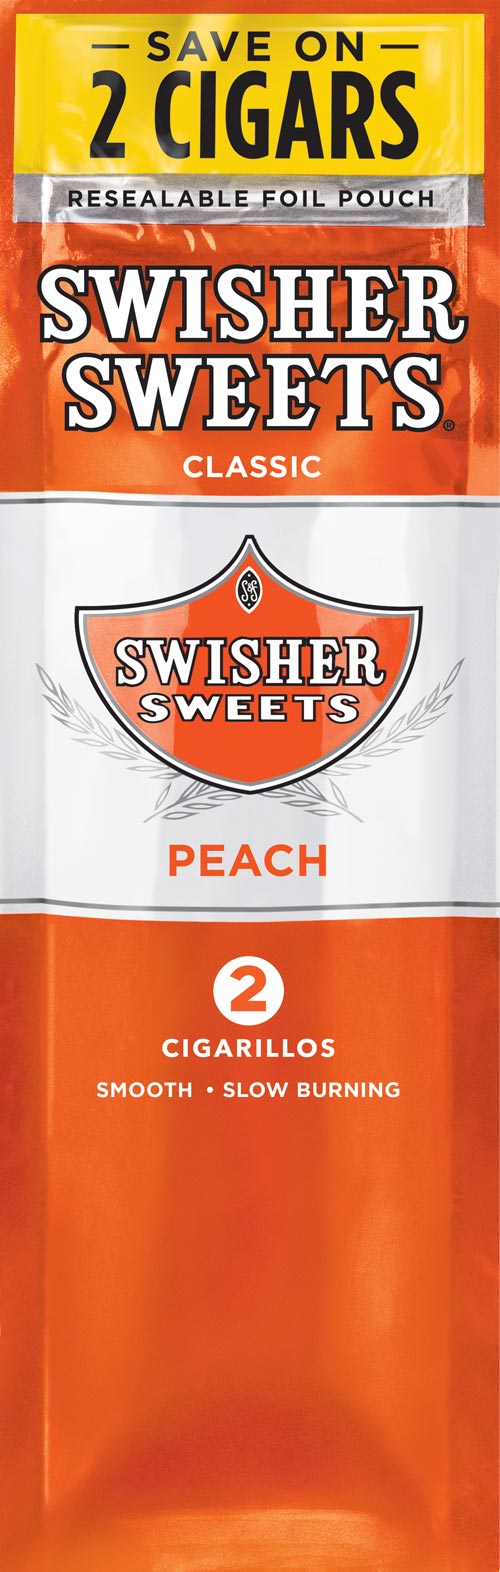 Swisher Sweets Cigarillos - Peach